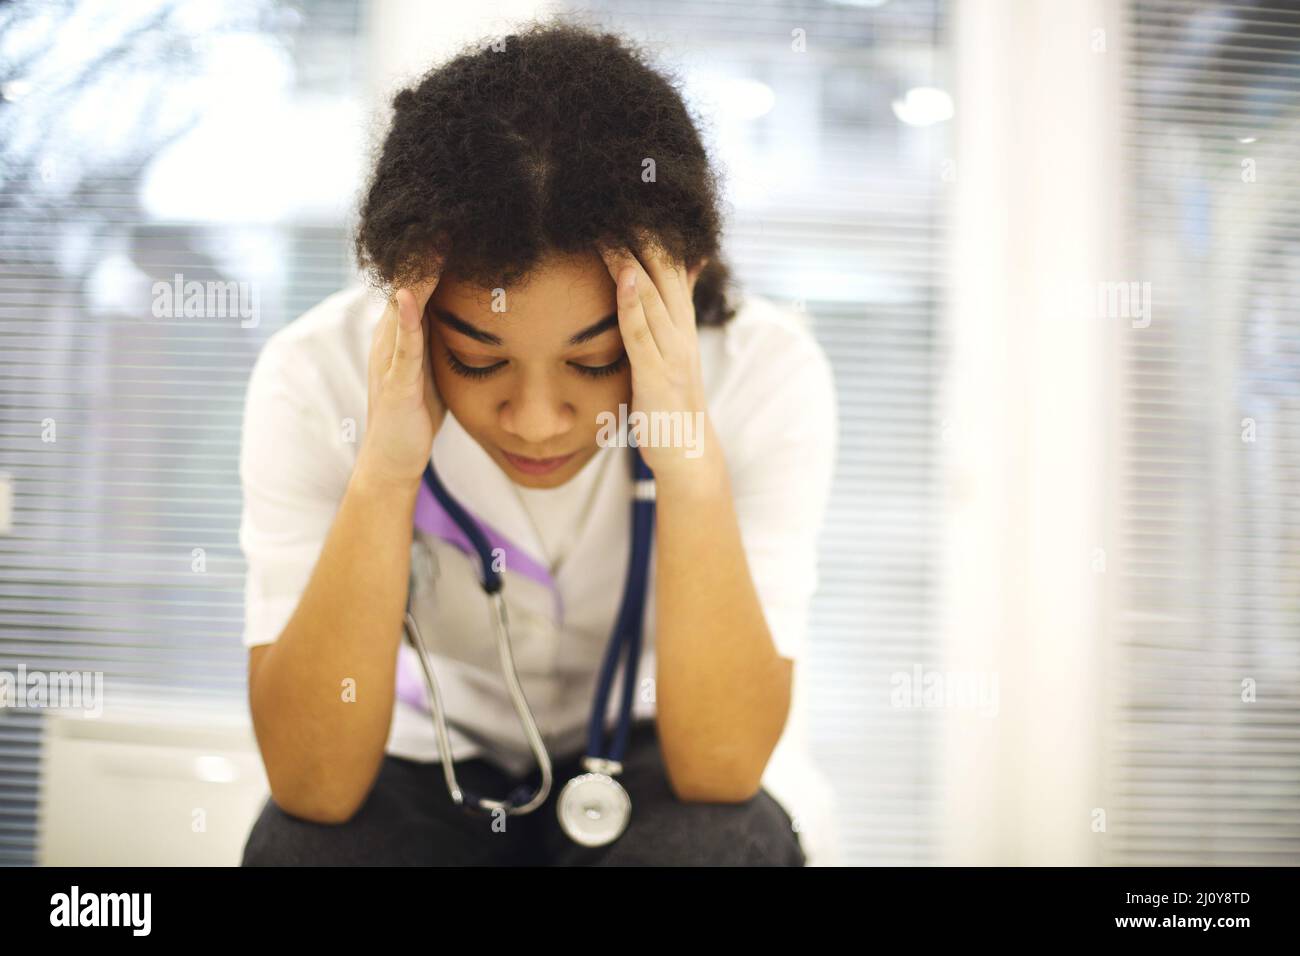 Sad depressed young african american nurse sitting with frustrated face expression Stock Photo